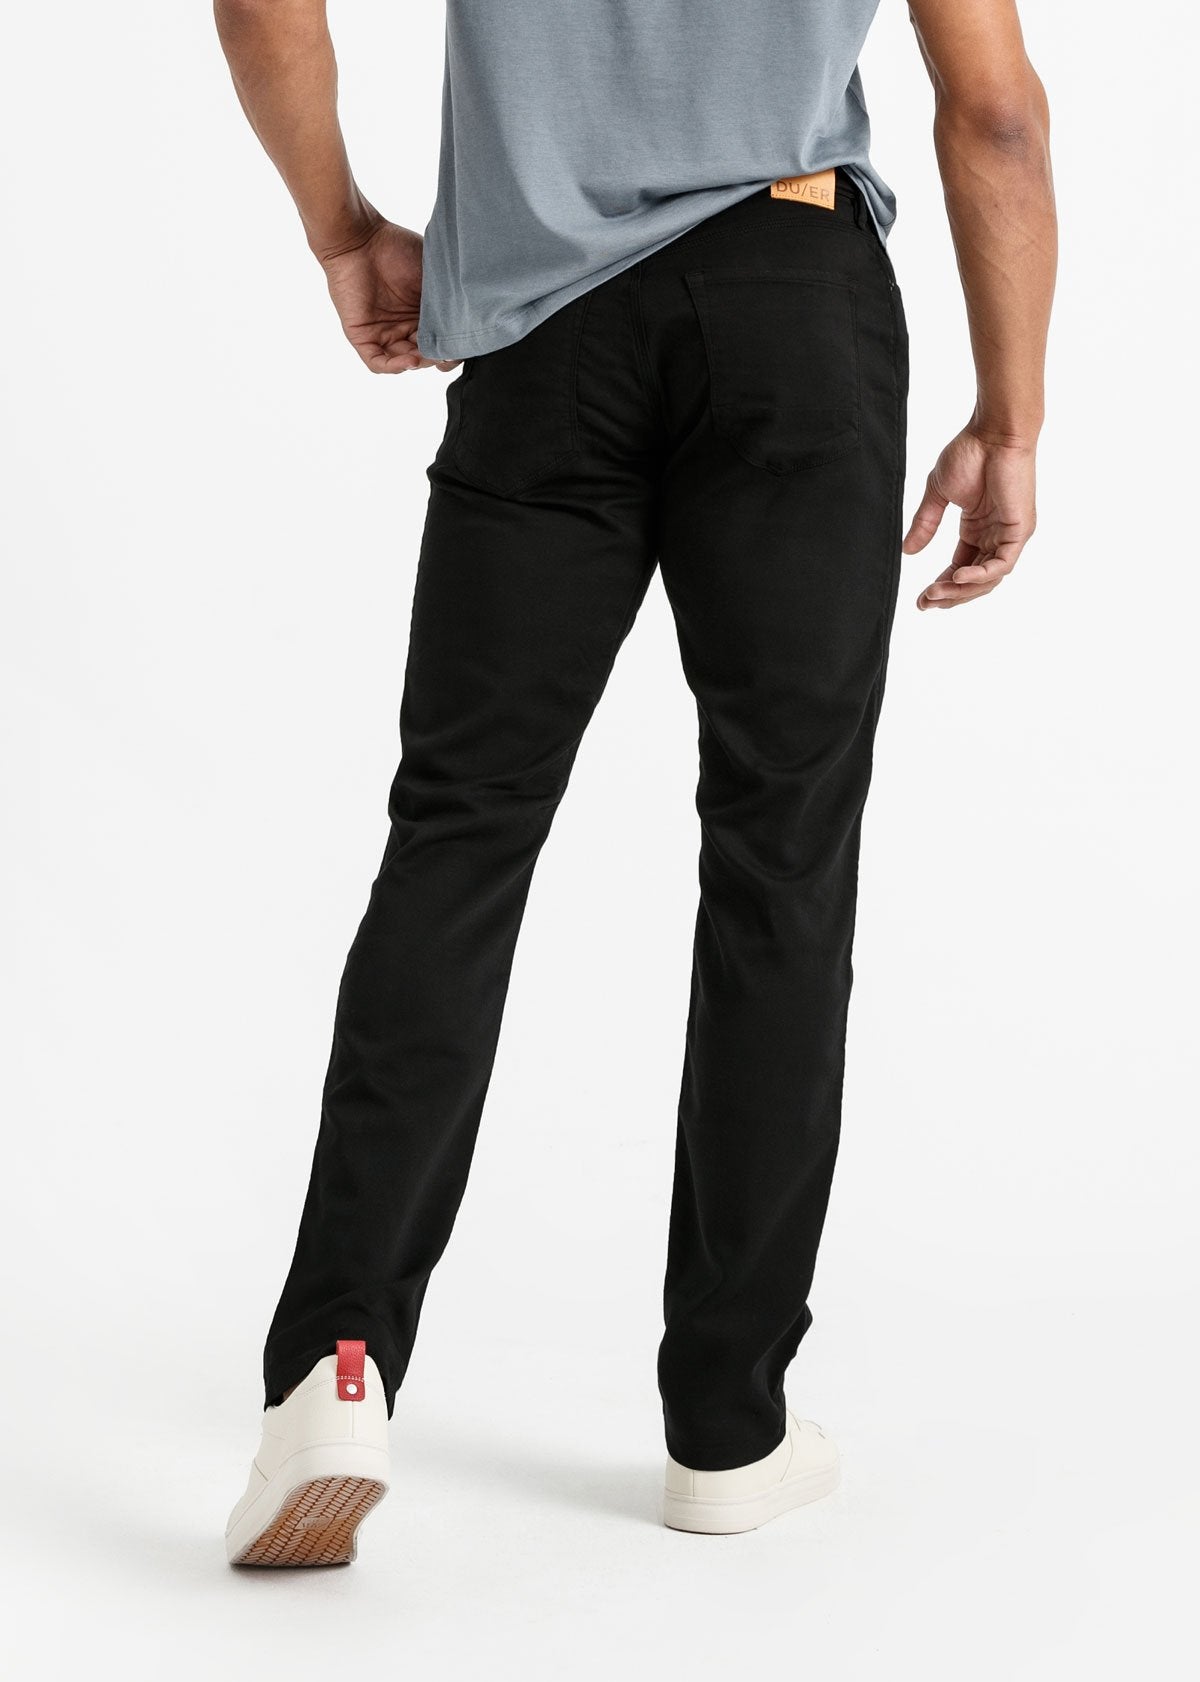 man wearing a black Relaxed Fit Sweatpant back